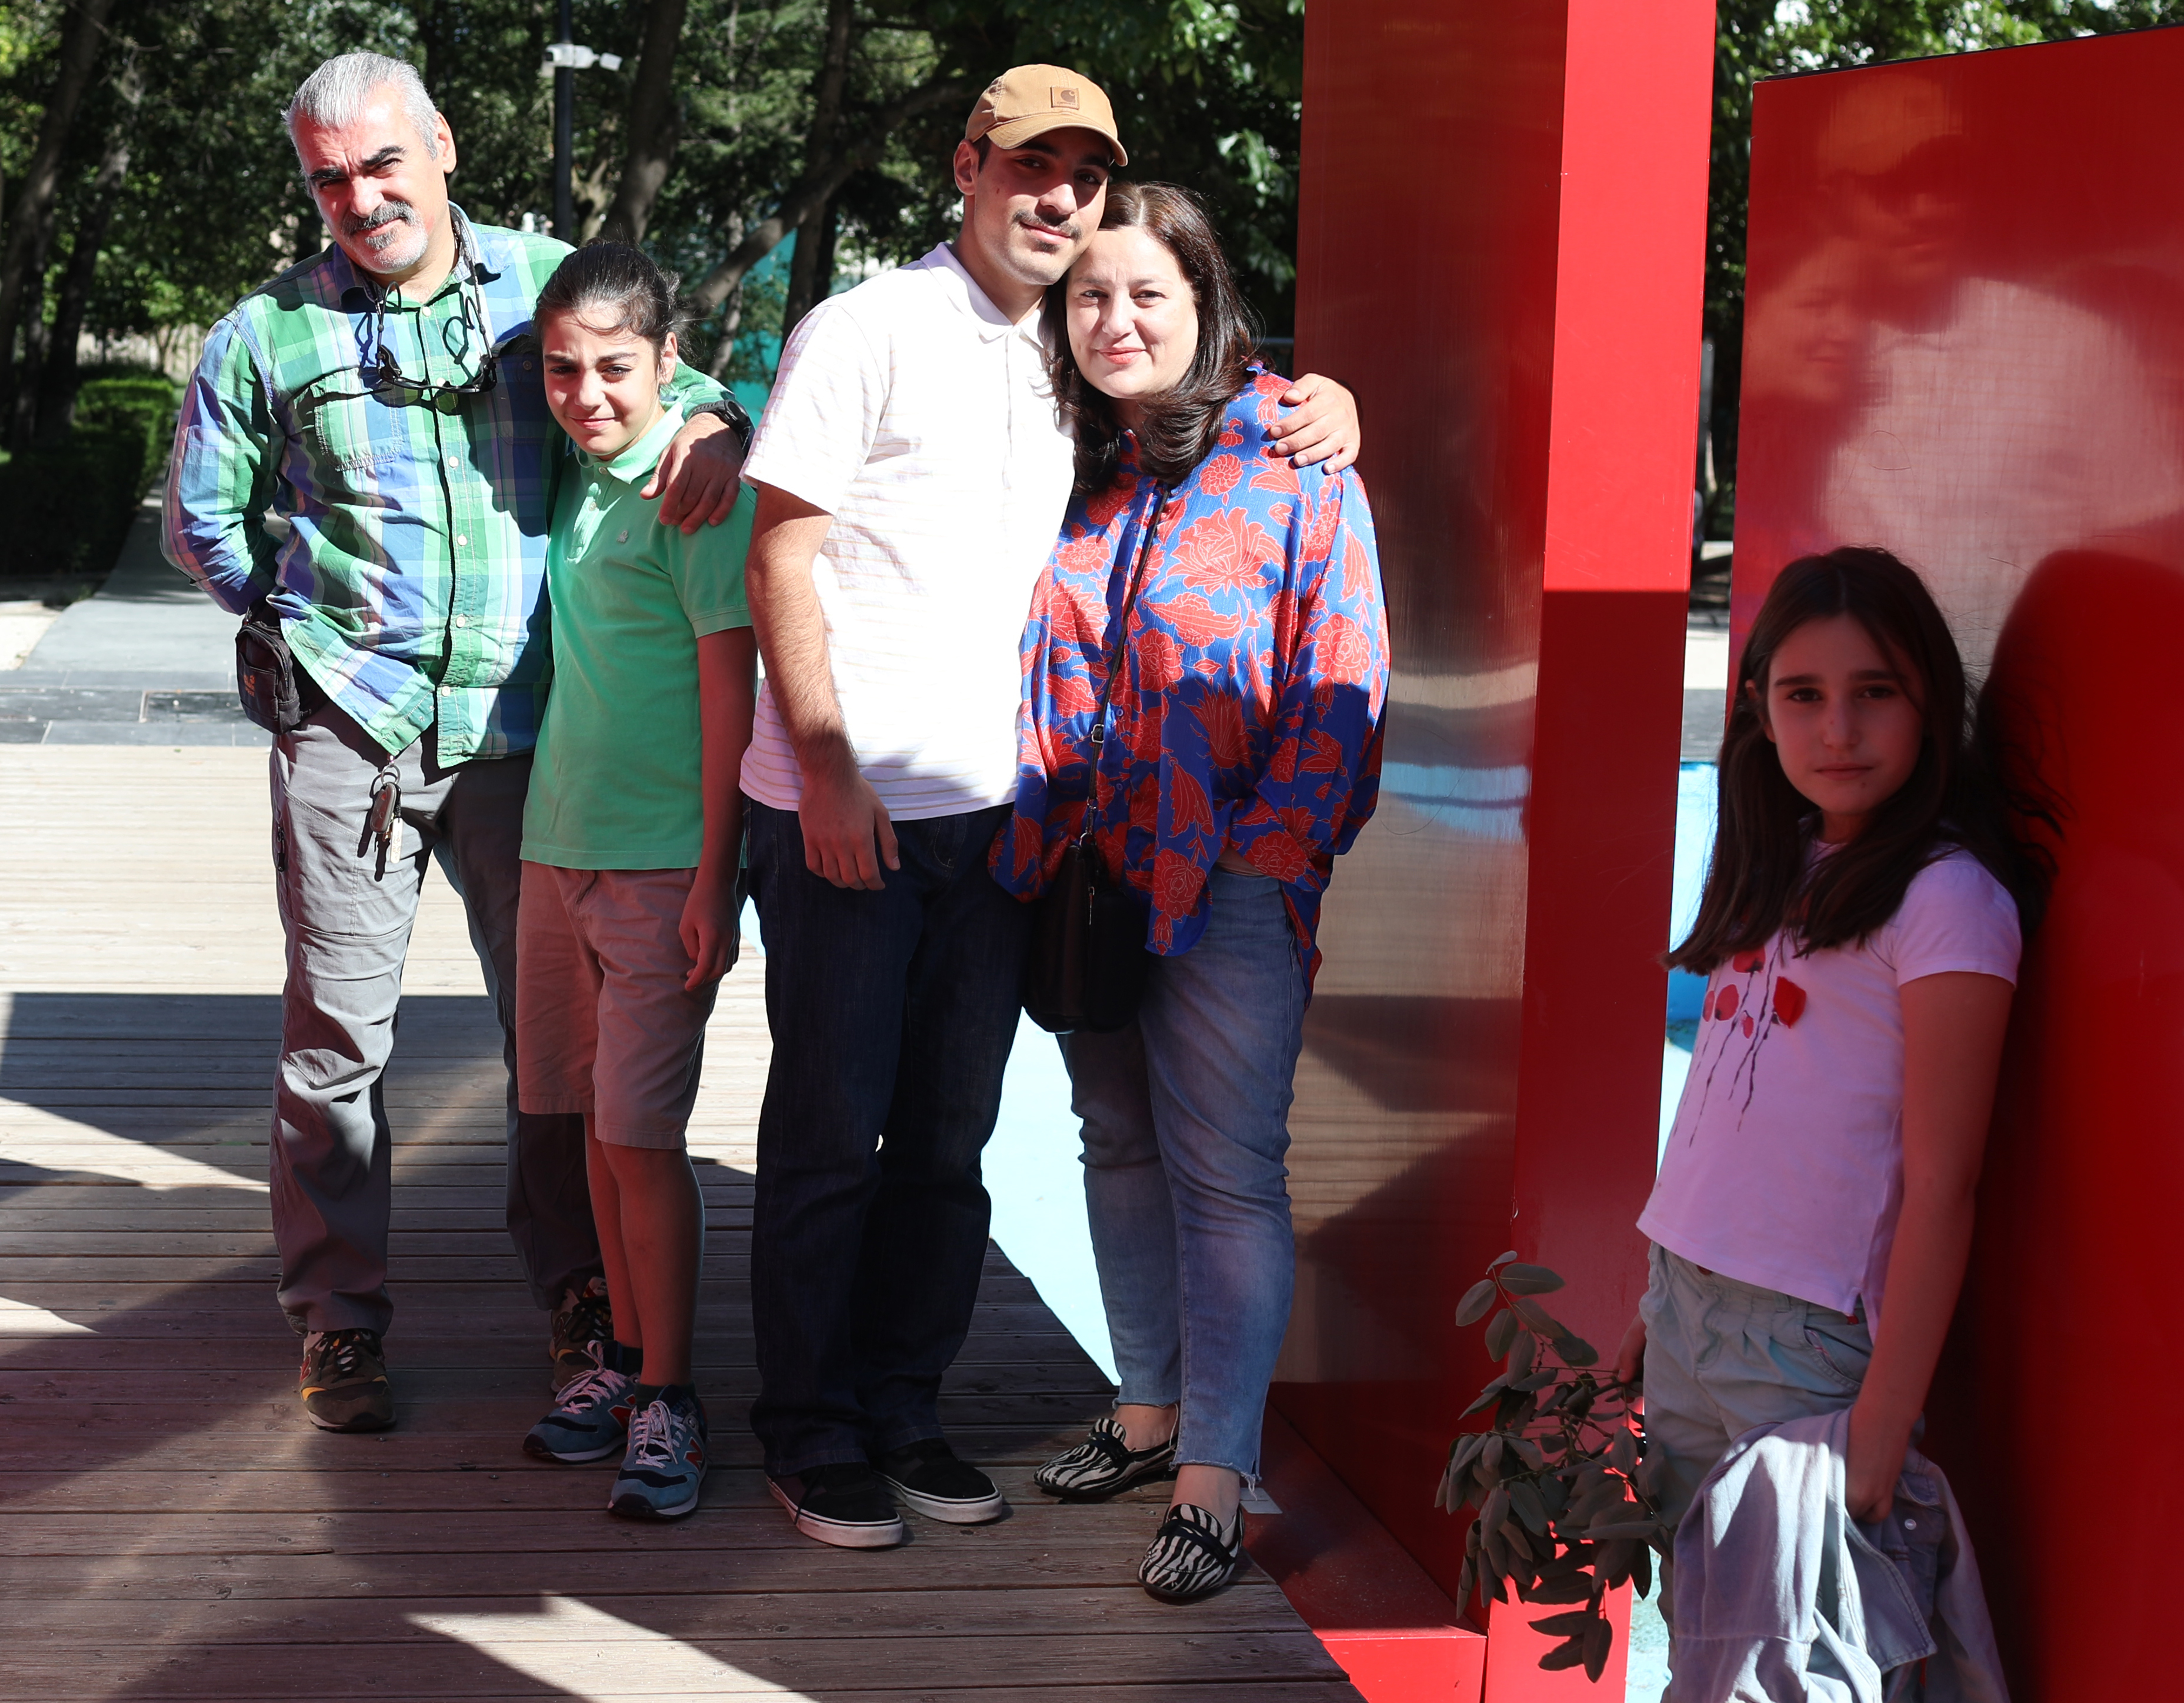 A mother, father and their three children are standing at red blocks outdoors